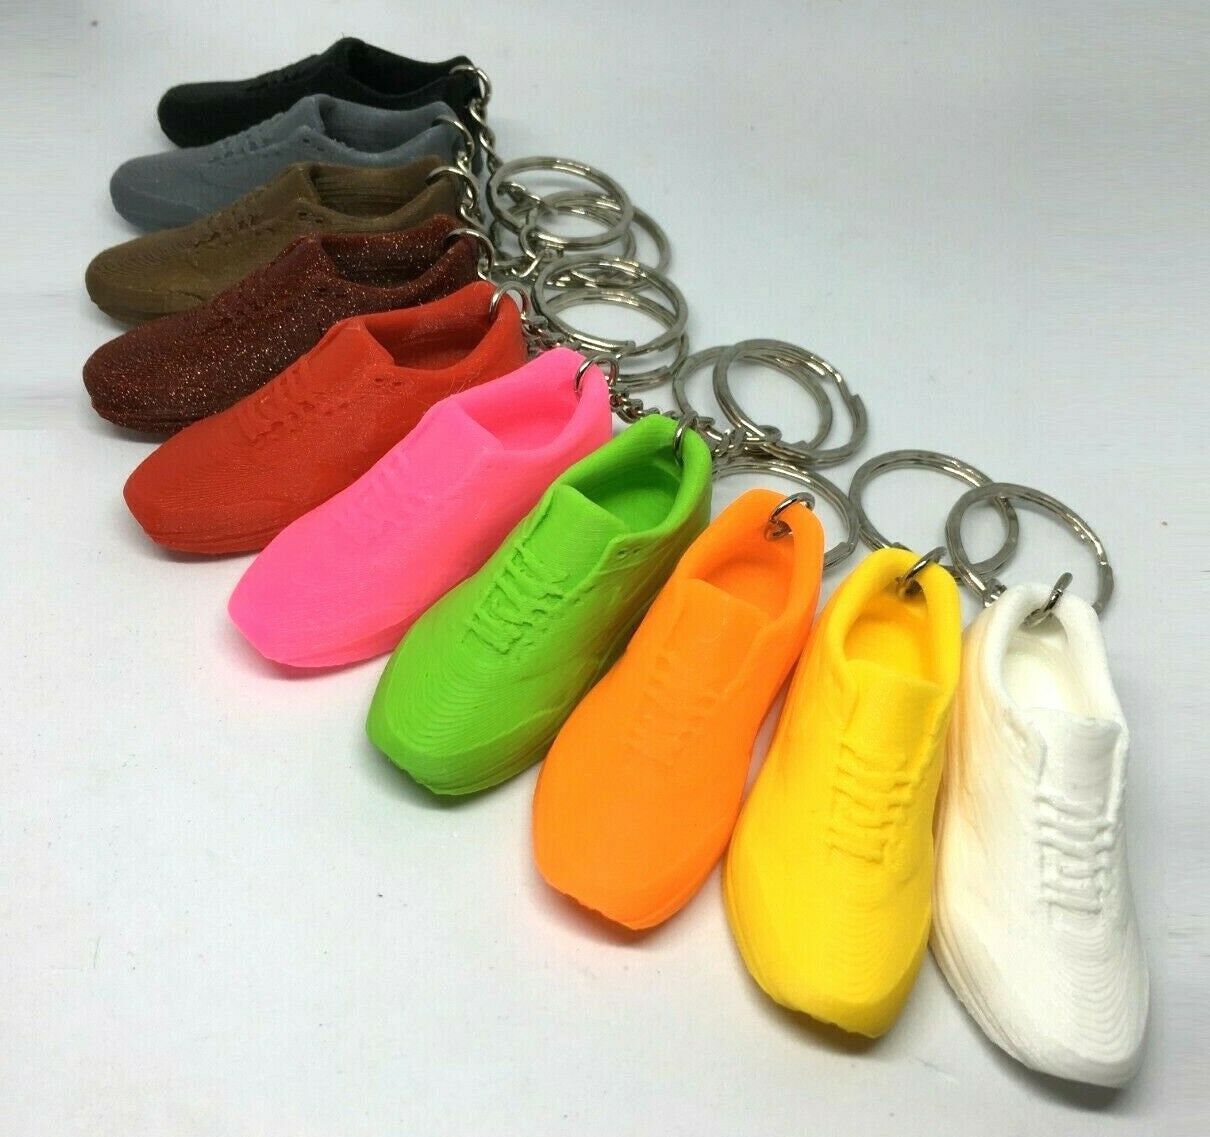 dhgatesvip8 Creative Mini PVC Sneaker 3D Sneaker Keychain for Men and Women - Perfect for Gym, Sports, and Basketball - Bulk Price